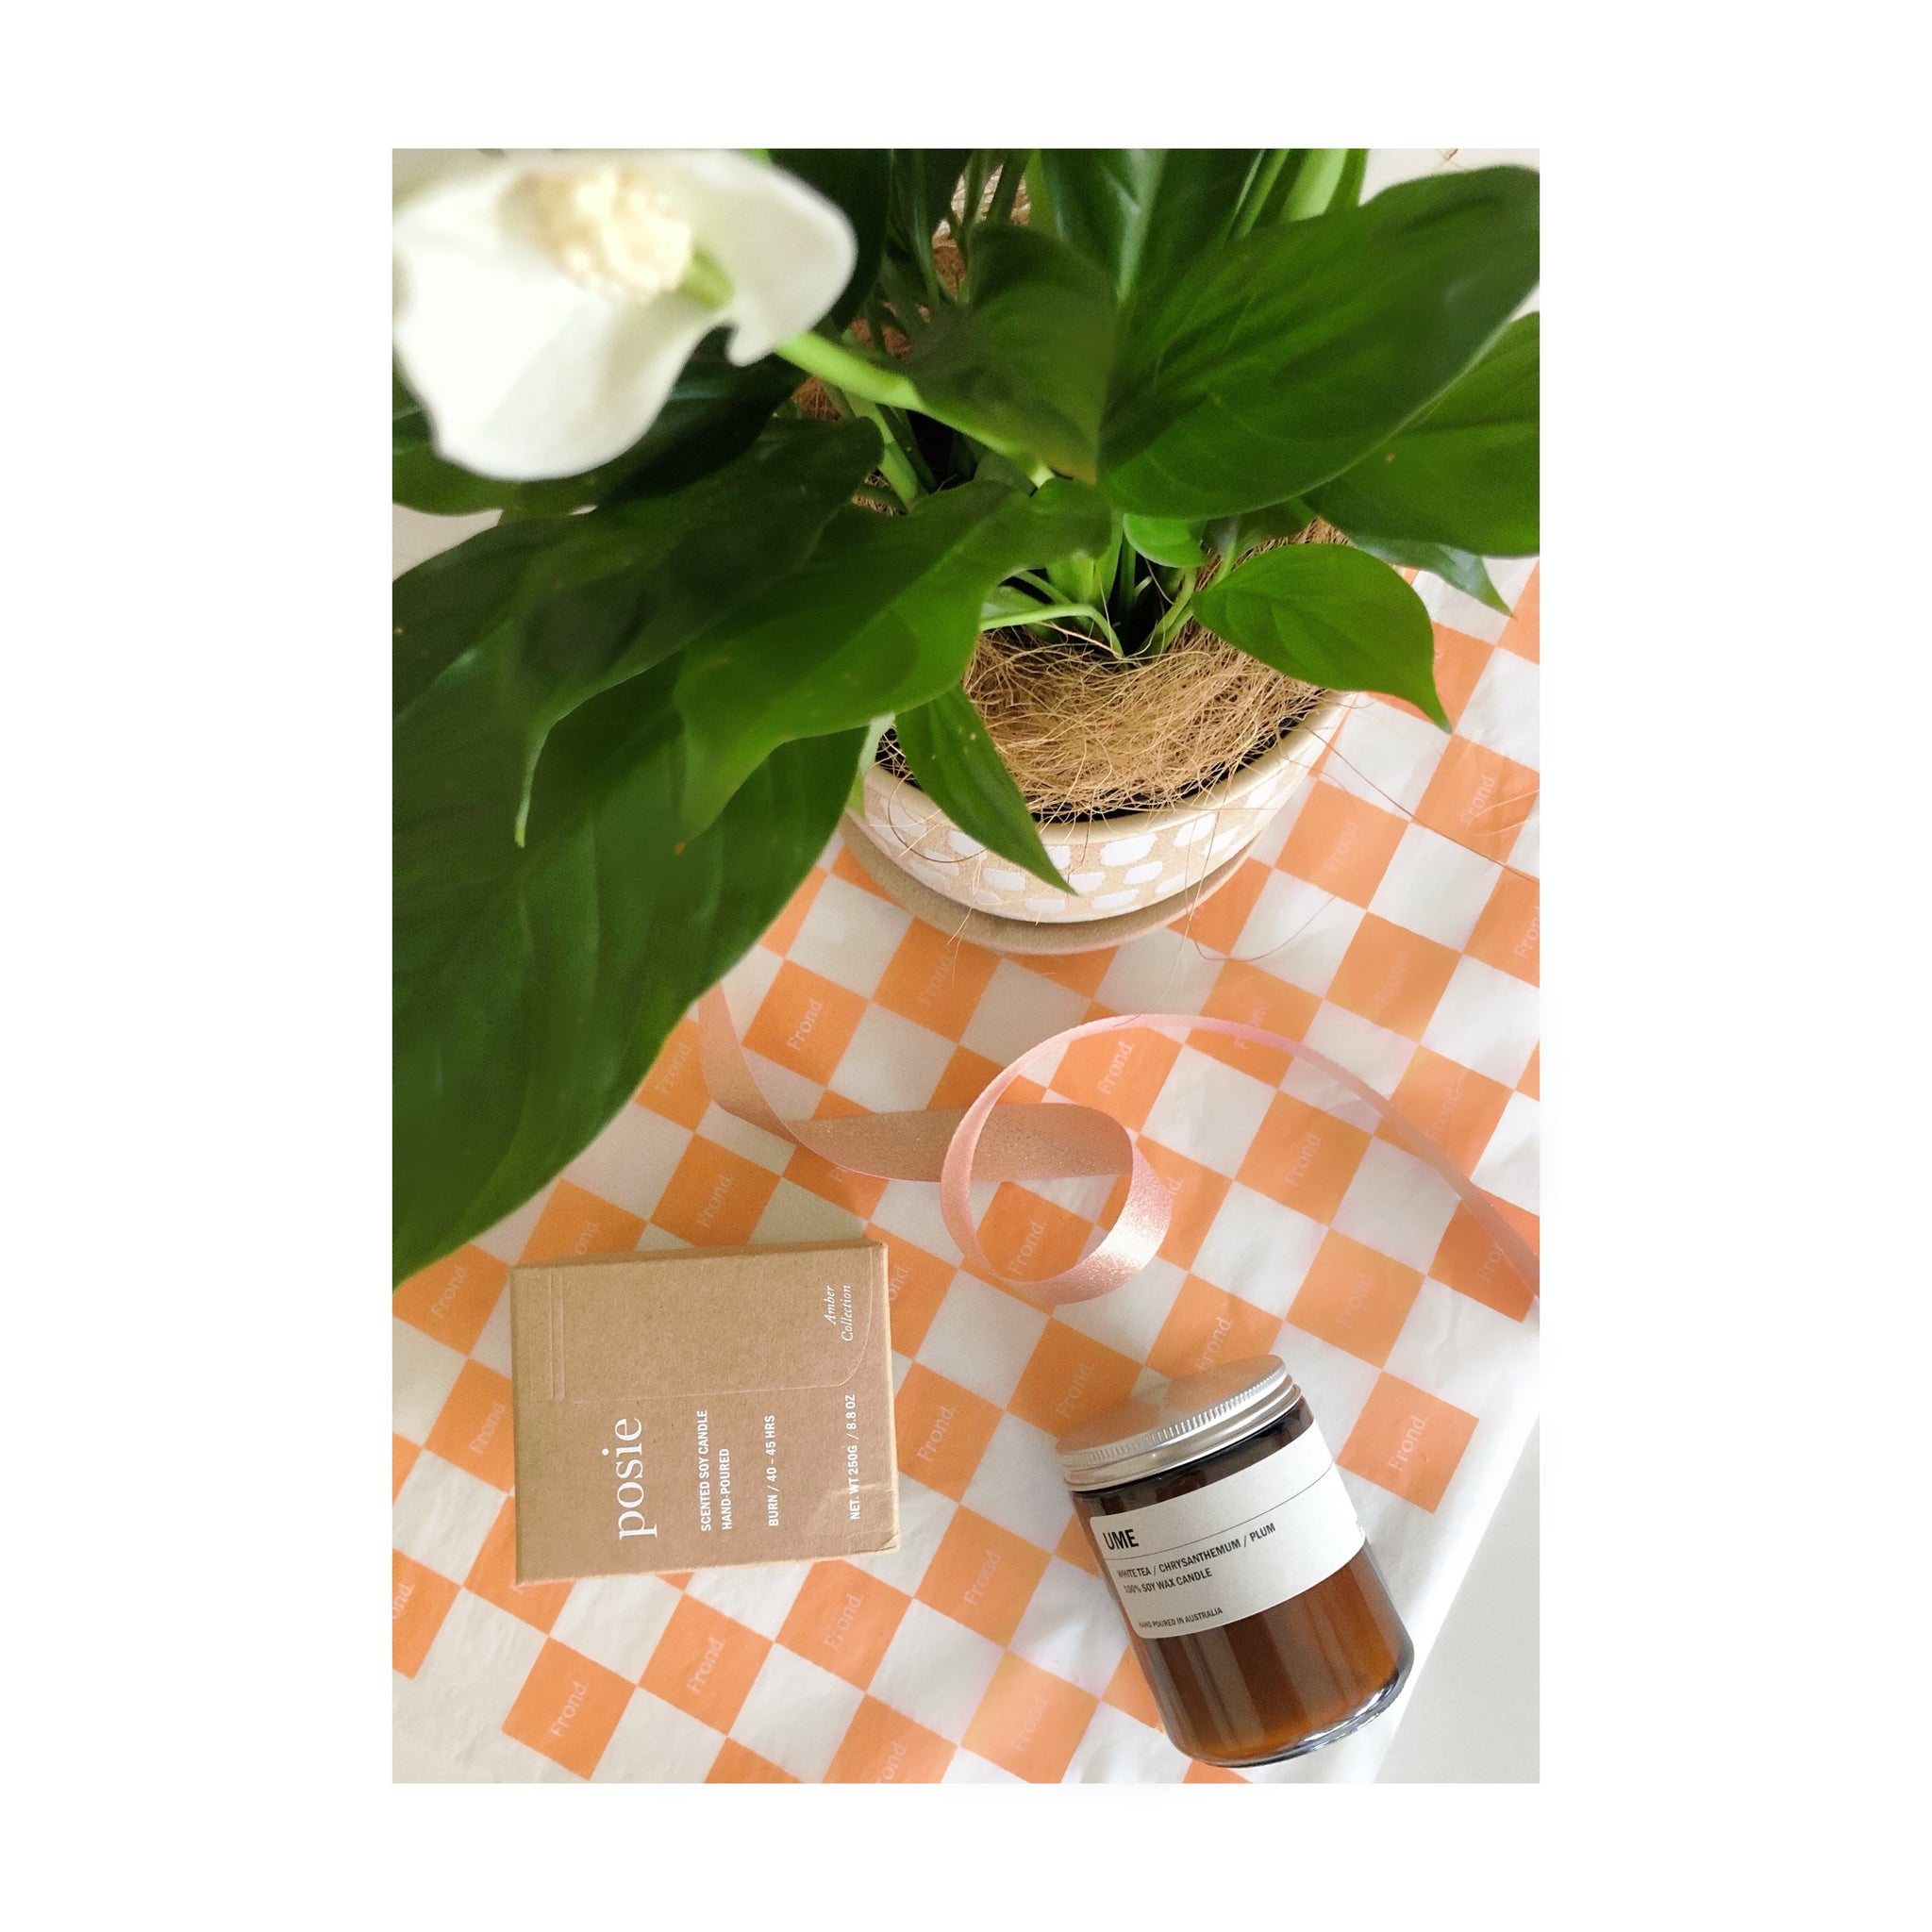 Peace & Love Plant Gift Hamper | Peace Lily + Luca Ceramic Pot & Saucer + We Are Posie Amber Soy Candle UME + Gift Wrap